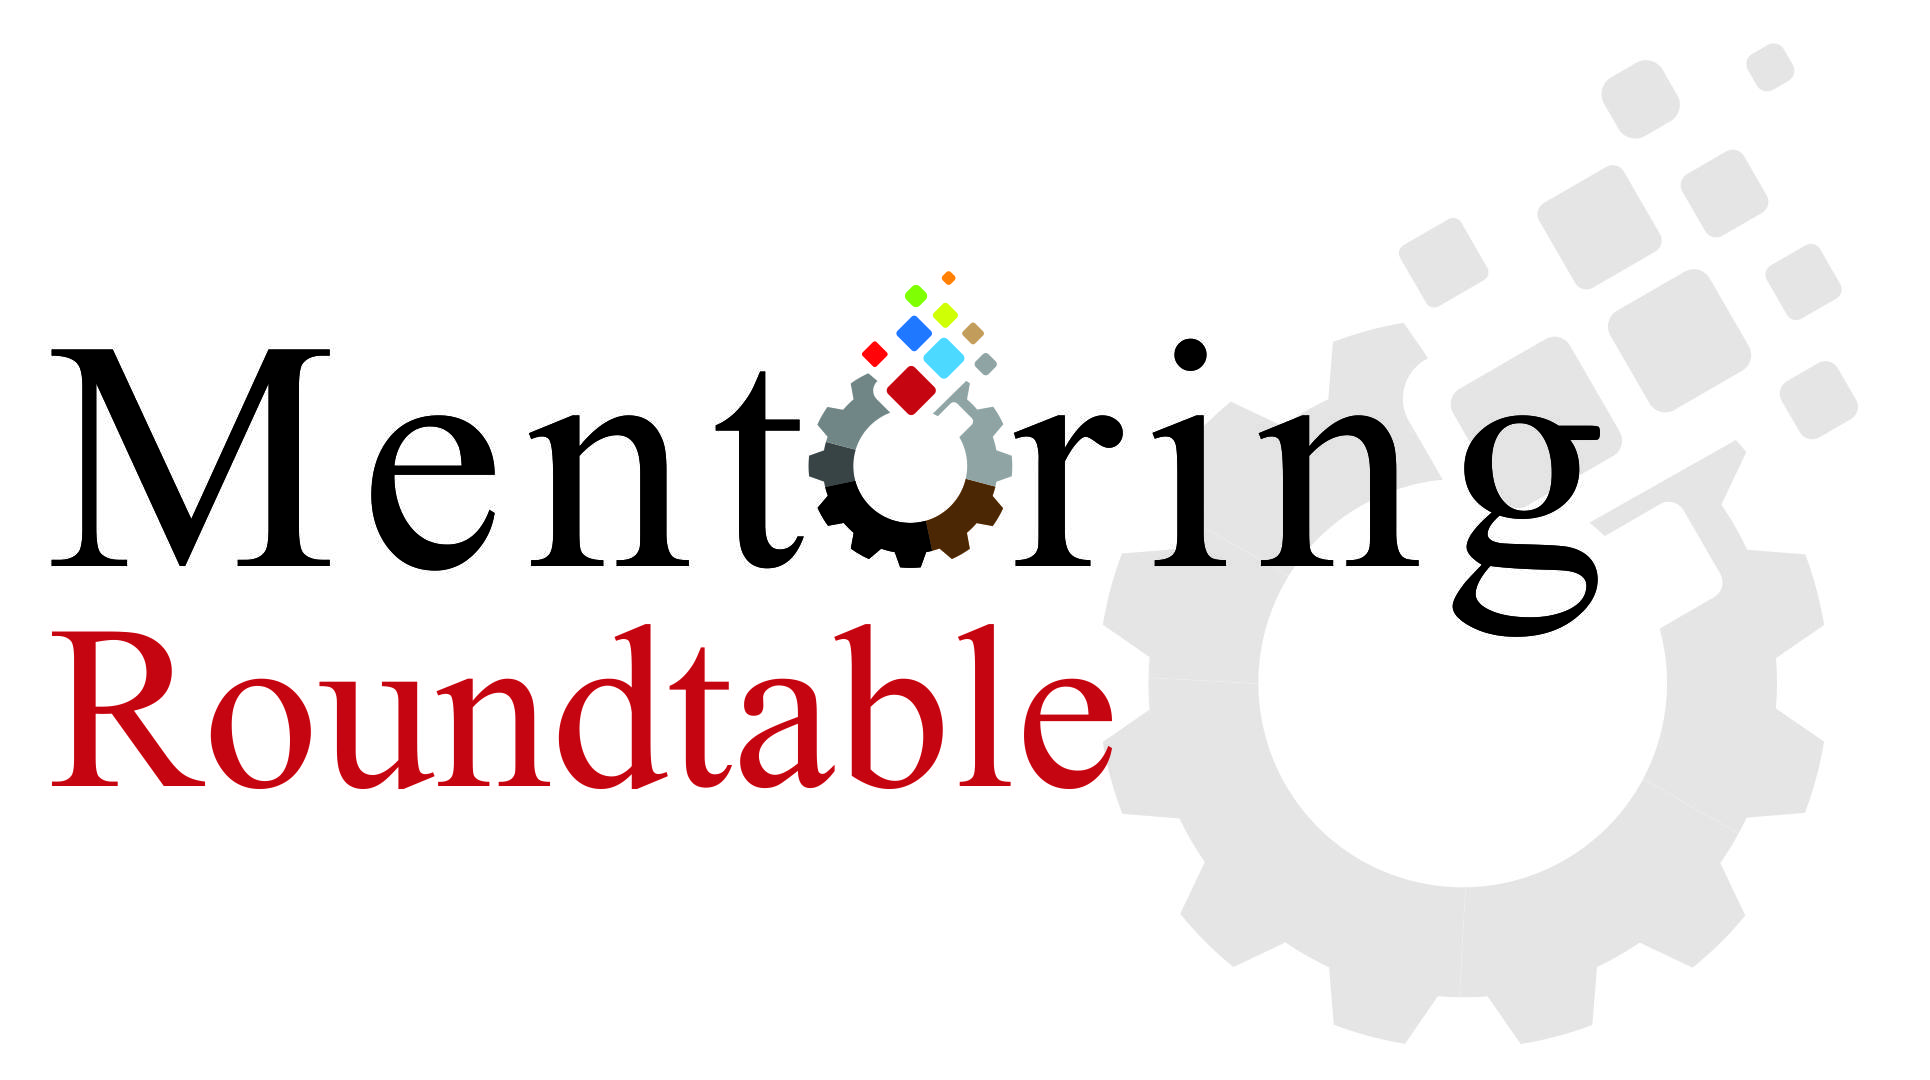 Mentoring Roundtable May 28th